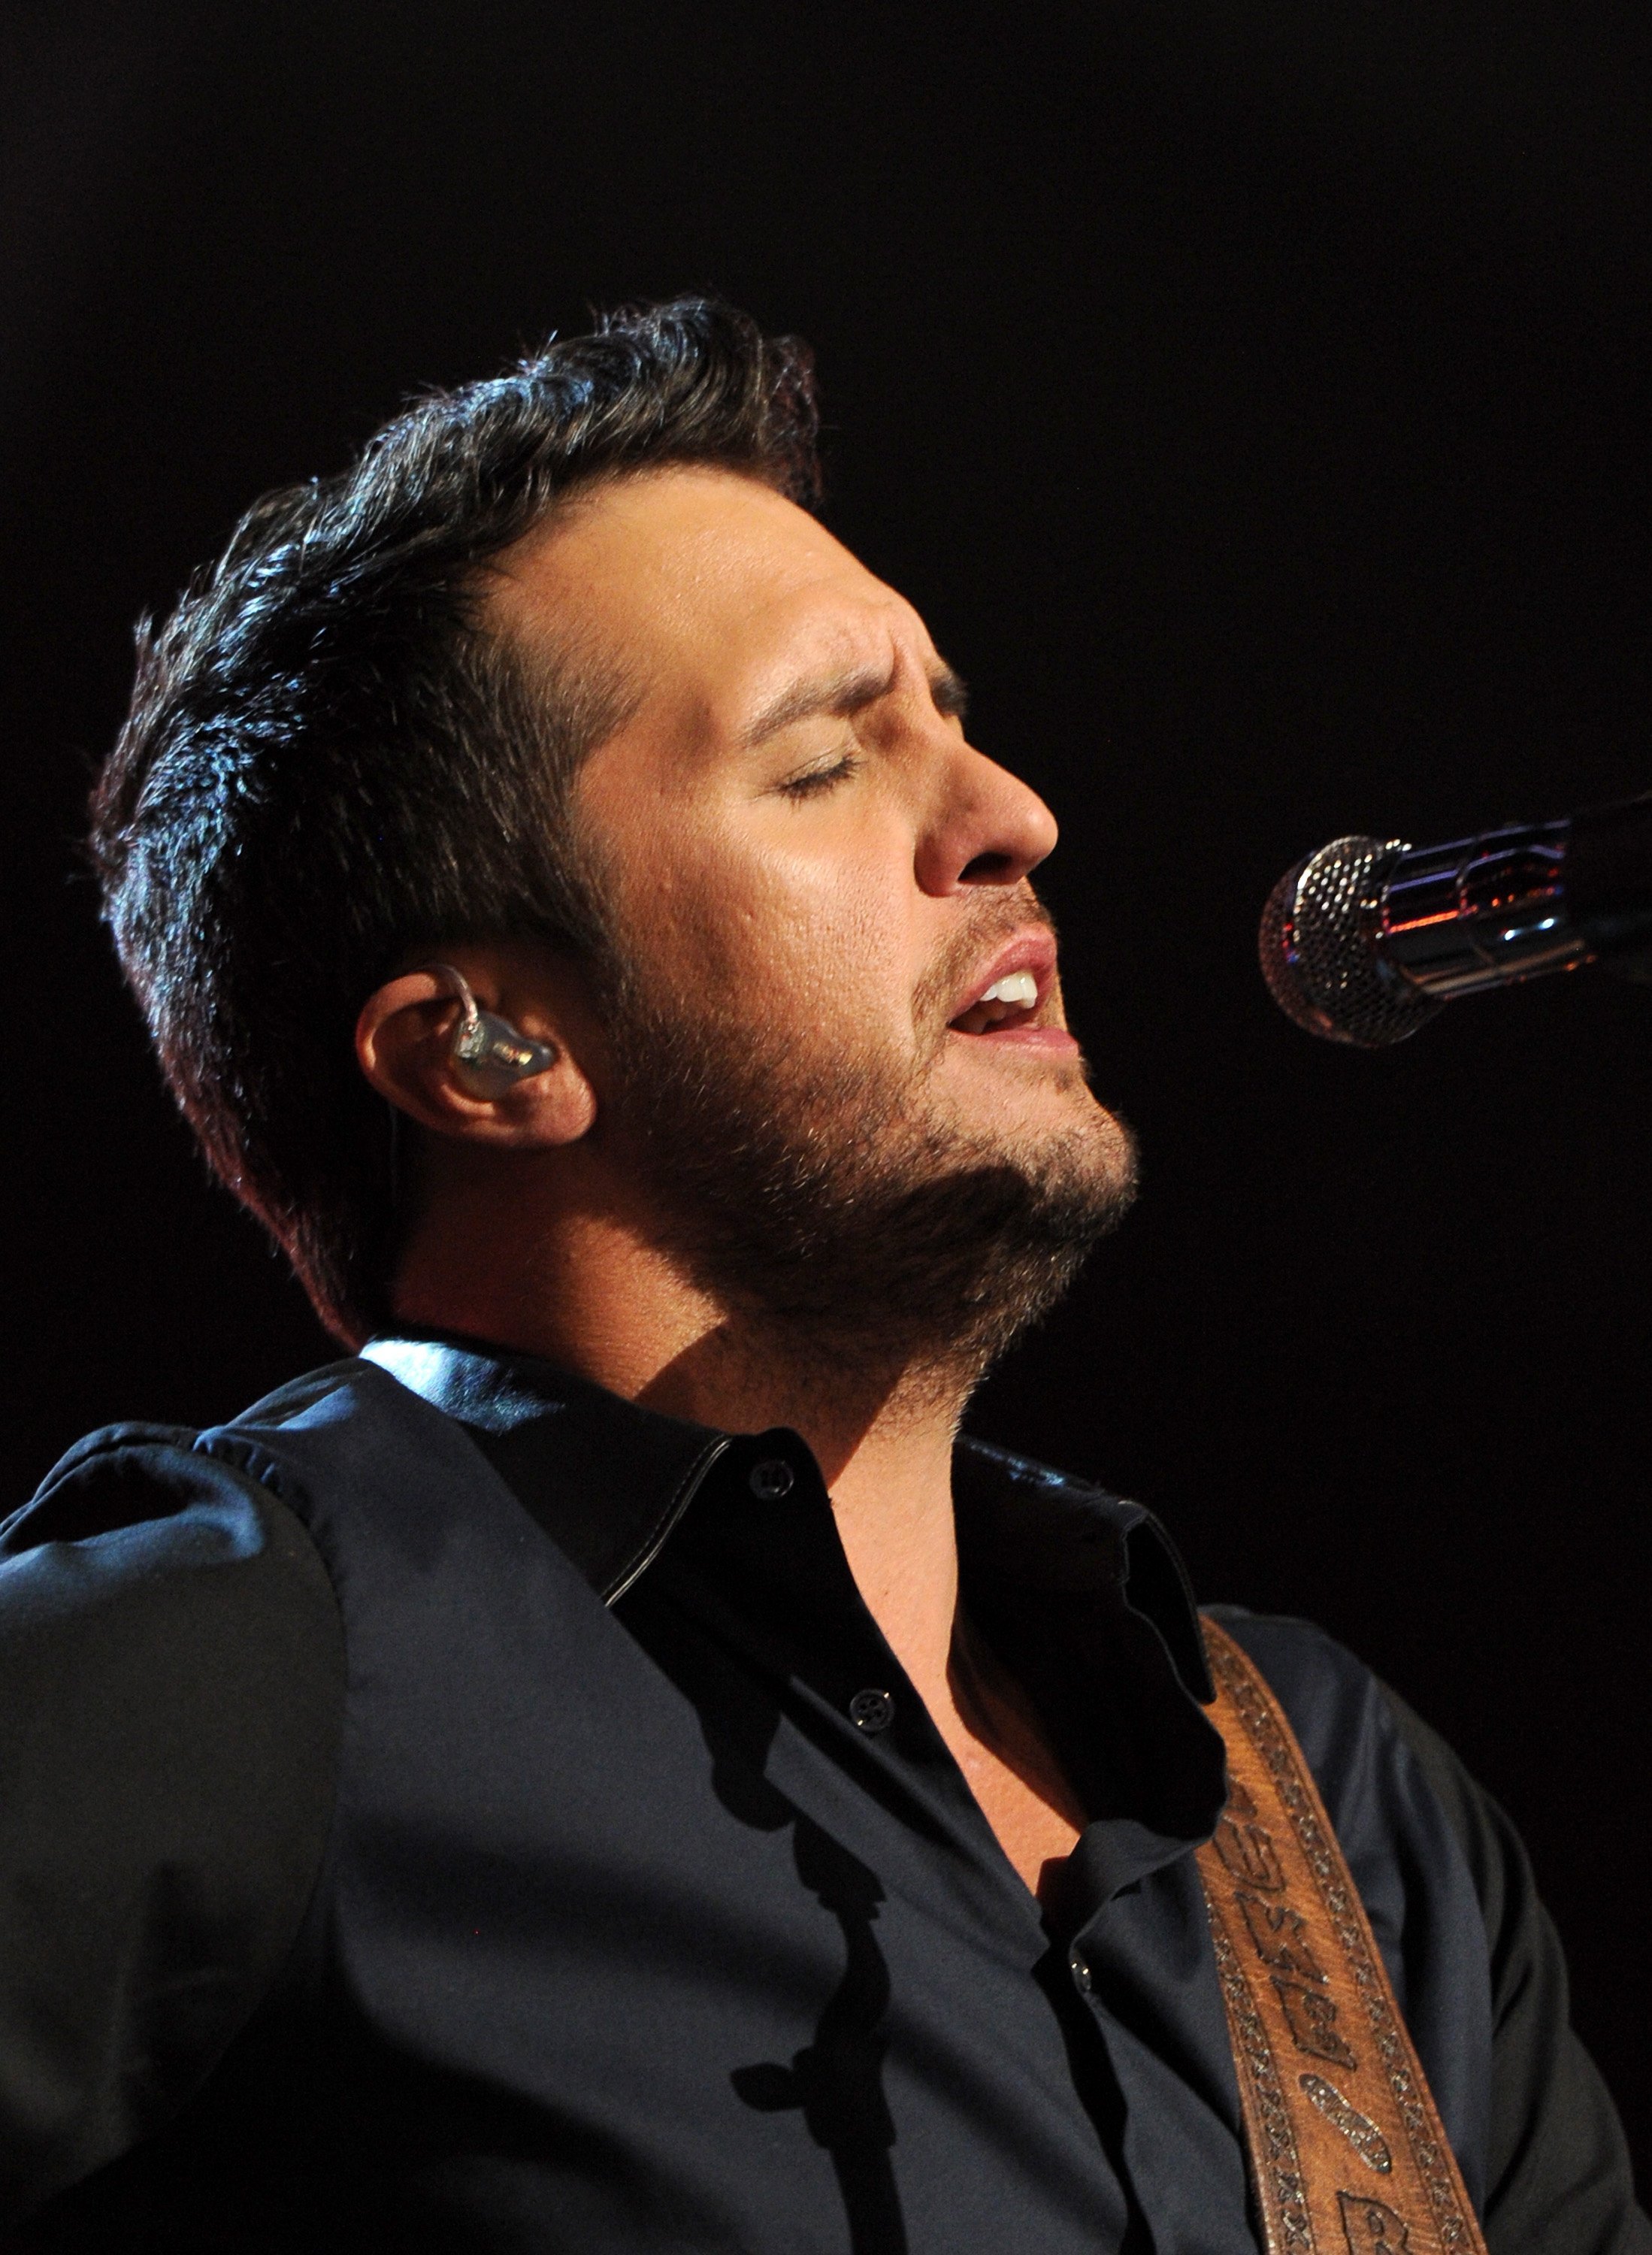 Luke Bryan, country singer, performs | Photo: Getty Images